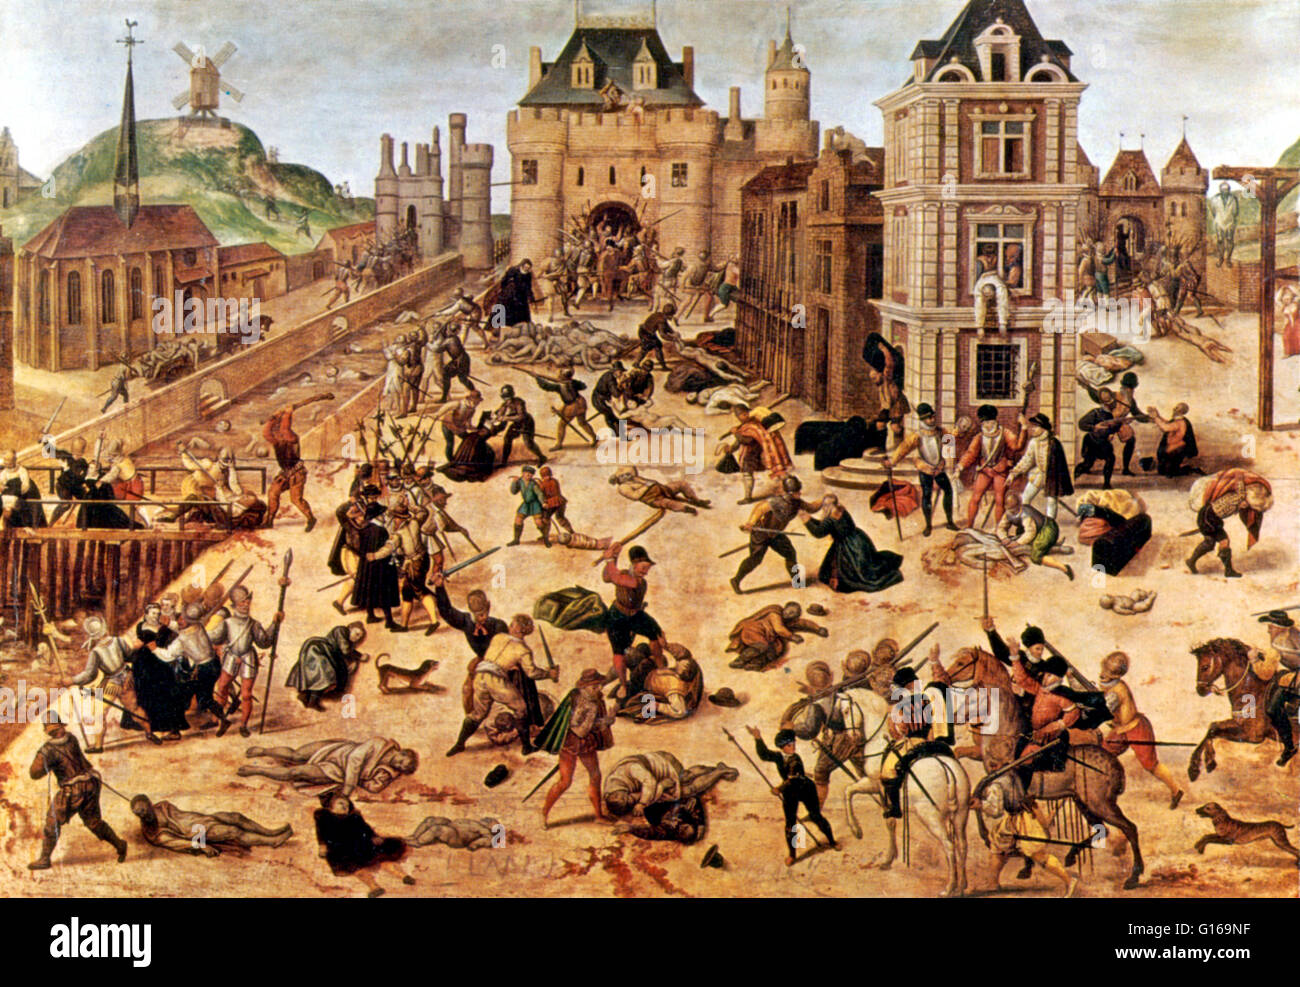 Painting by Francois Dubois, circa 1529, depicts Admiral Coligny's body hanging out of a window at the rear to the right. To the left rear, Catherine de' Medici is shown emerging from the Château du Louvre to inspect a heap of bodies. The St. Bartholomew' Stock Photo